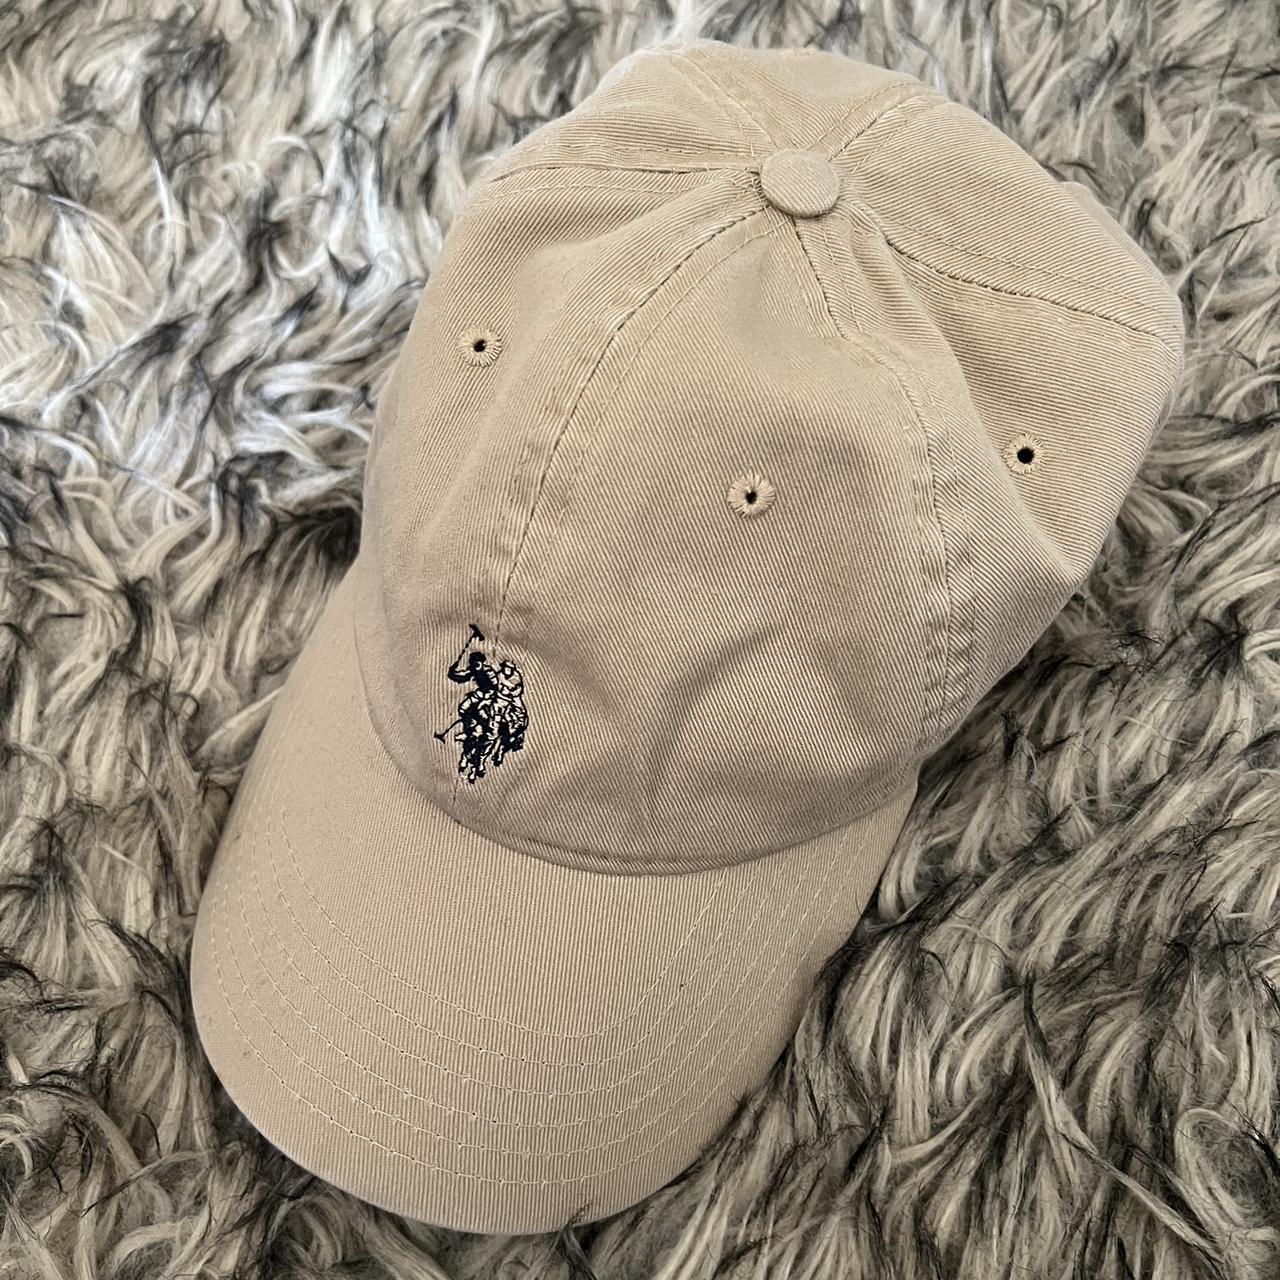 U.S. Polo Assn. Women's Cream and Brown Hat (4)